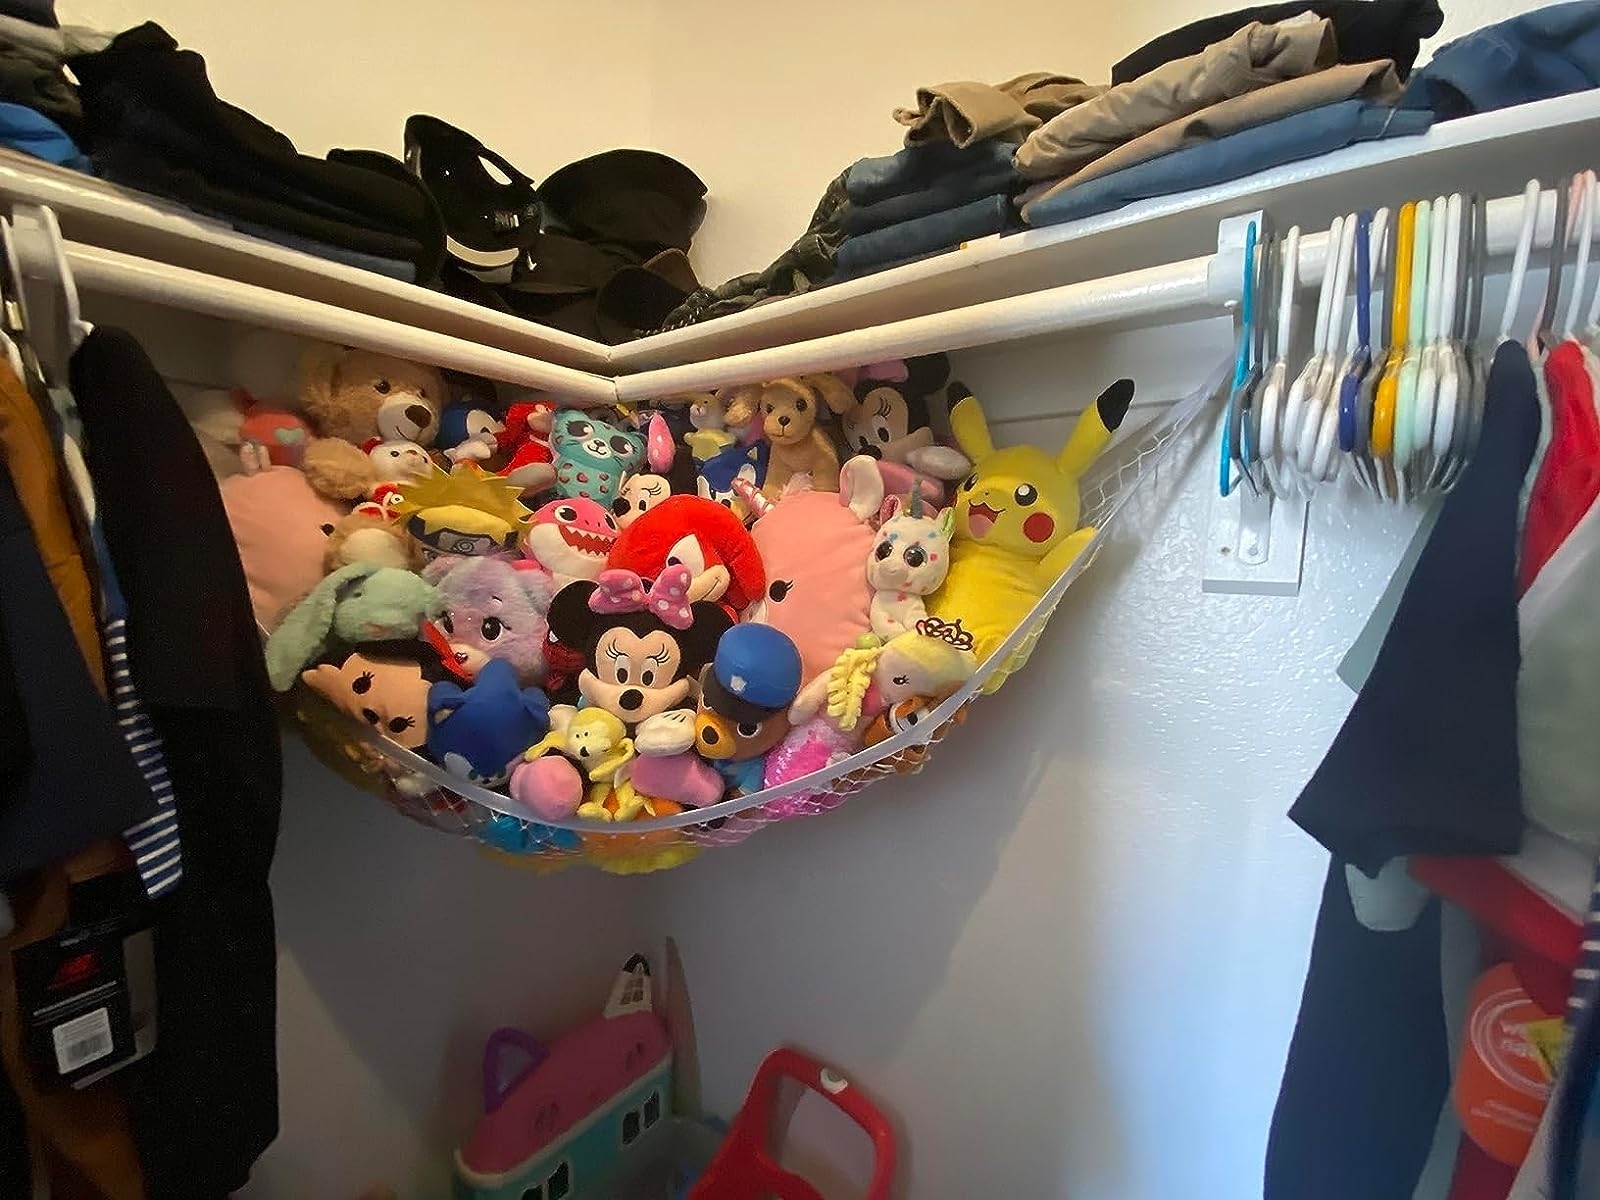 Reviewer image of stuffed animals in a pink hammock hanging in a closet corner